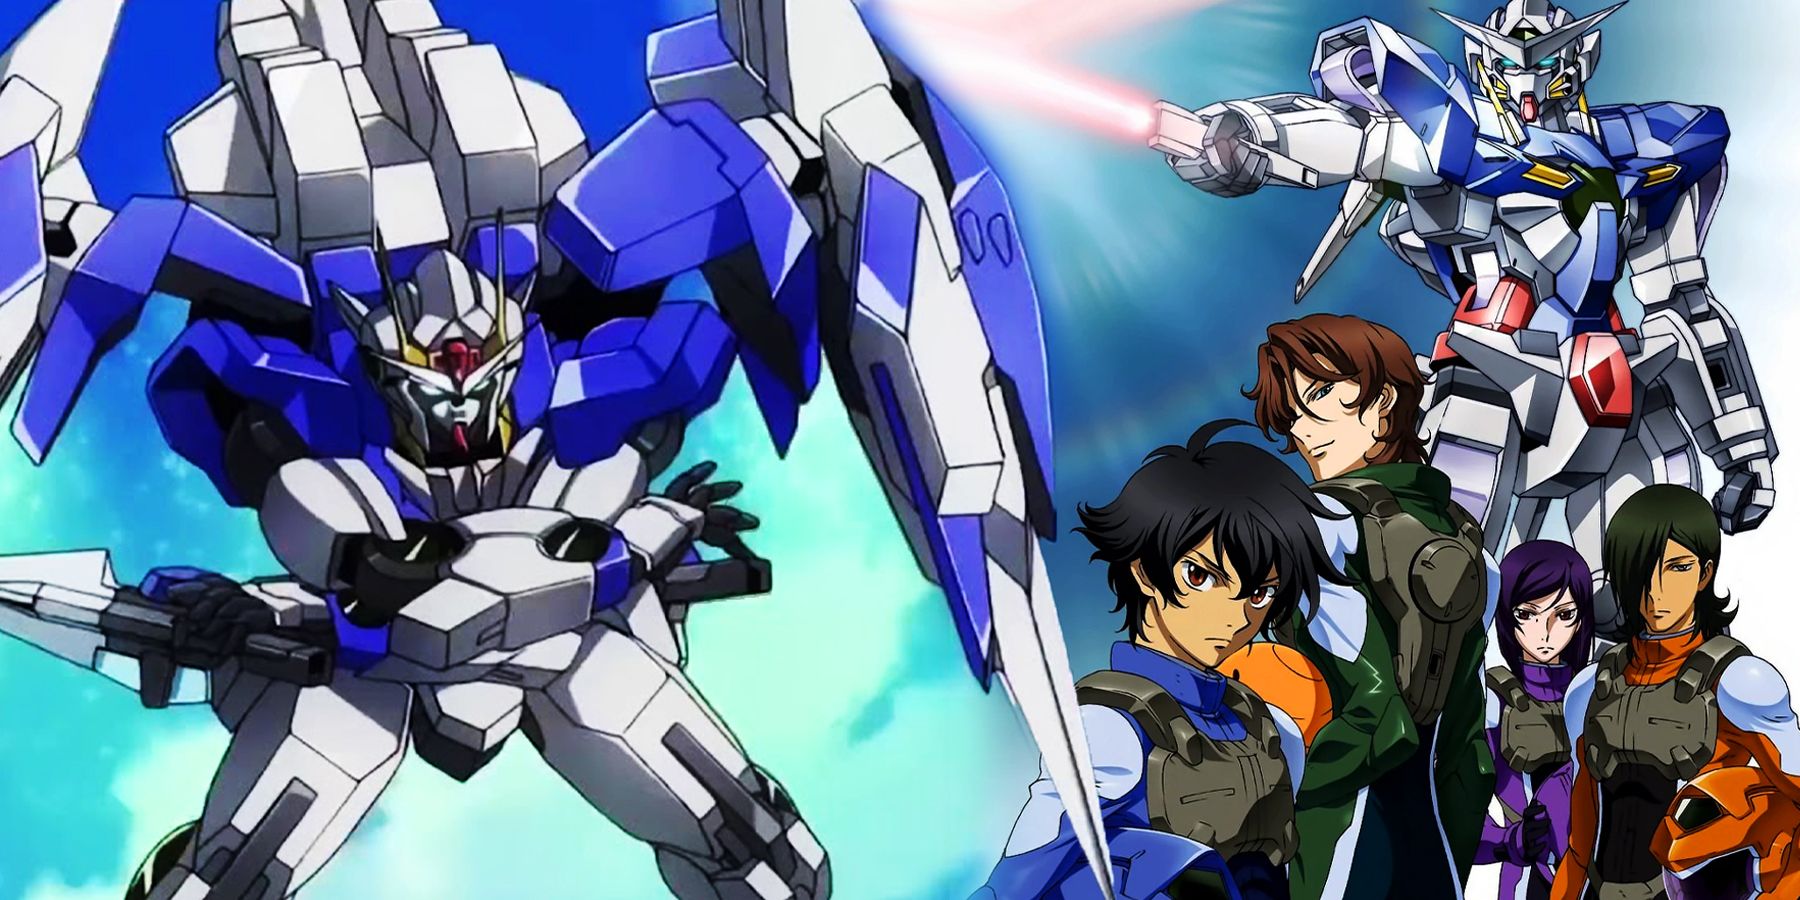 GN-0000 in battle and Setsuna F. Seiei with Tieria Erde, Lockon Stratos, Graham Aker and others from Mobile Suit Gundam 00